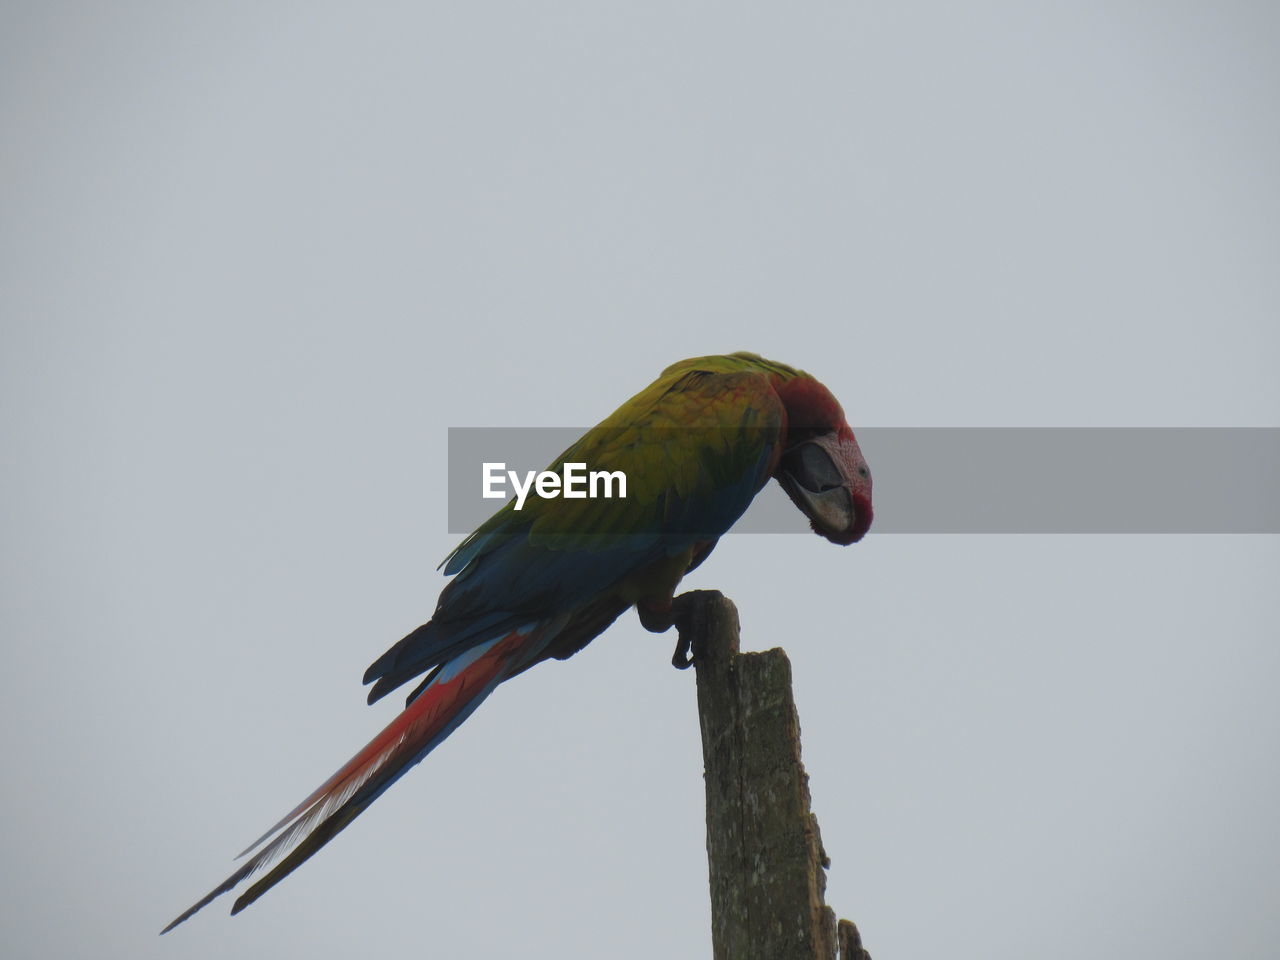 BIRD PERCHING ON WOODEN POST AGAINST SKY